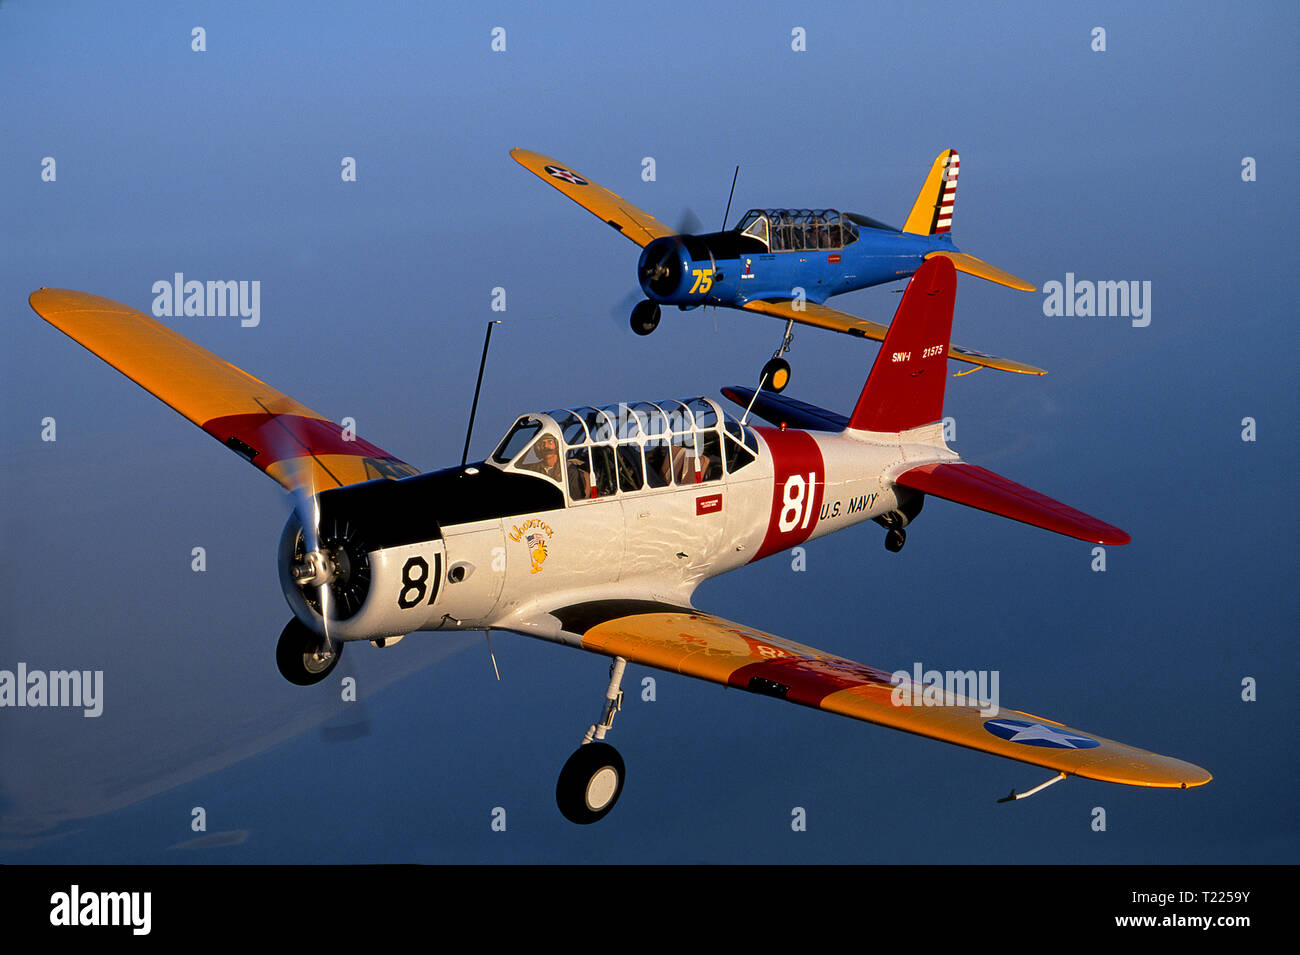 Consolidated Vultee US Army Air Corps Basic Trainer airplane, Vultee  Vibrator, Pilot training airplane, US Army AirCorps Stock Photo - Alamy